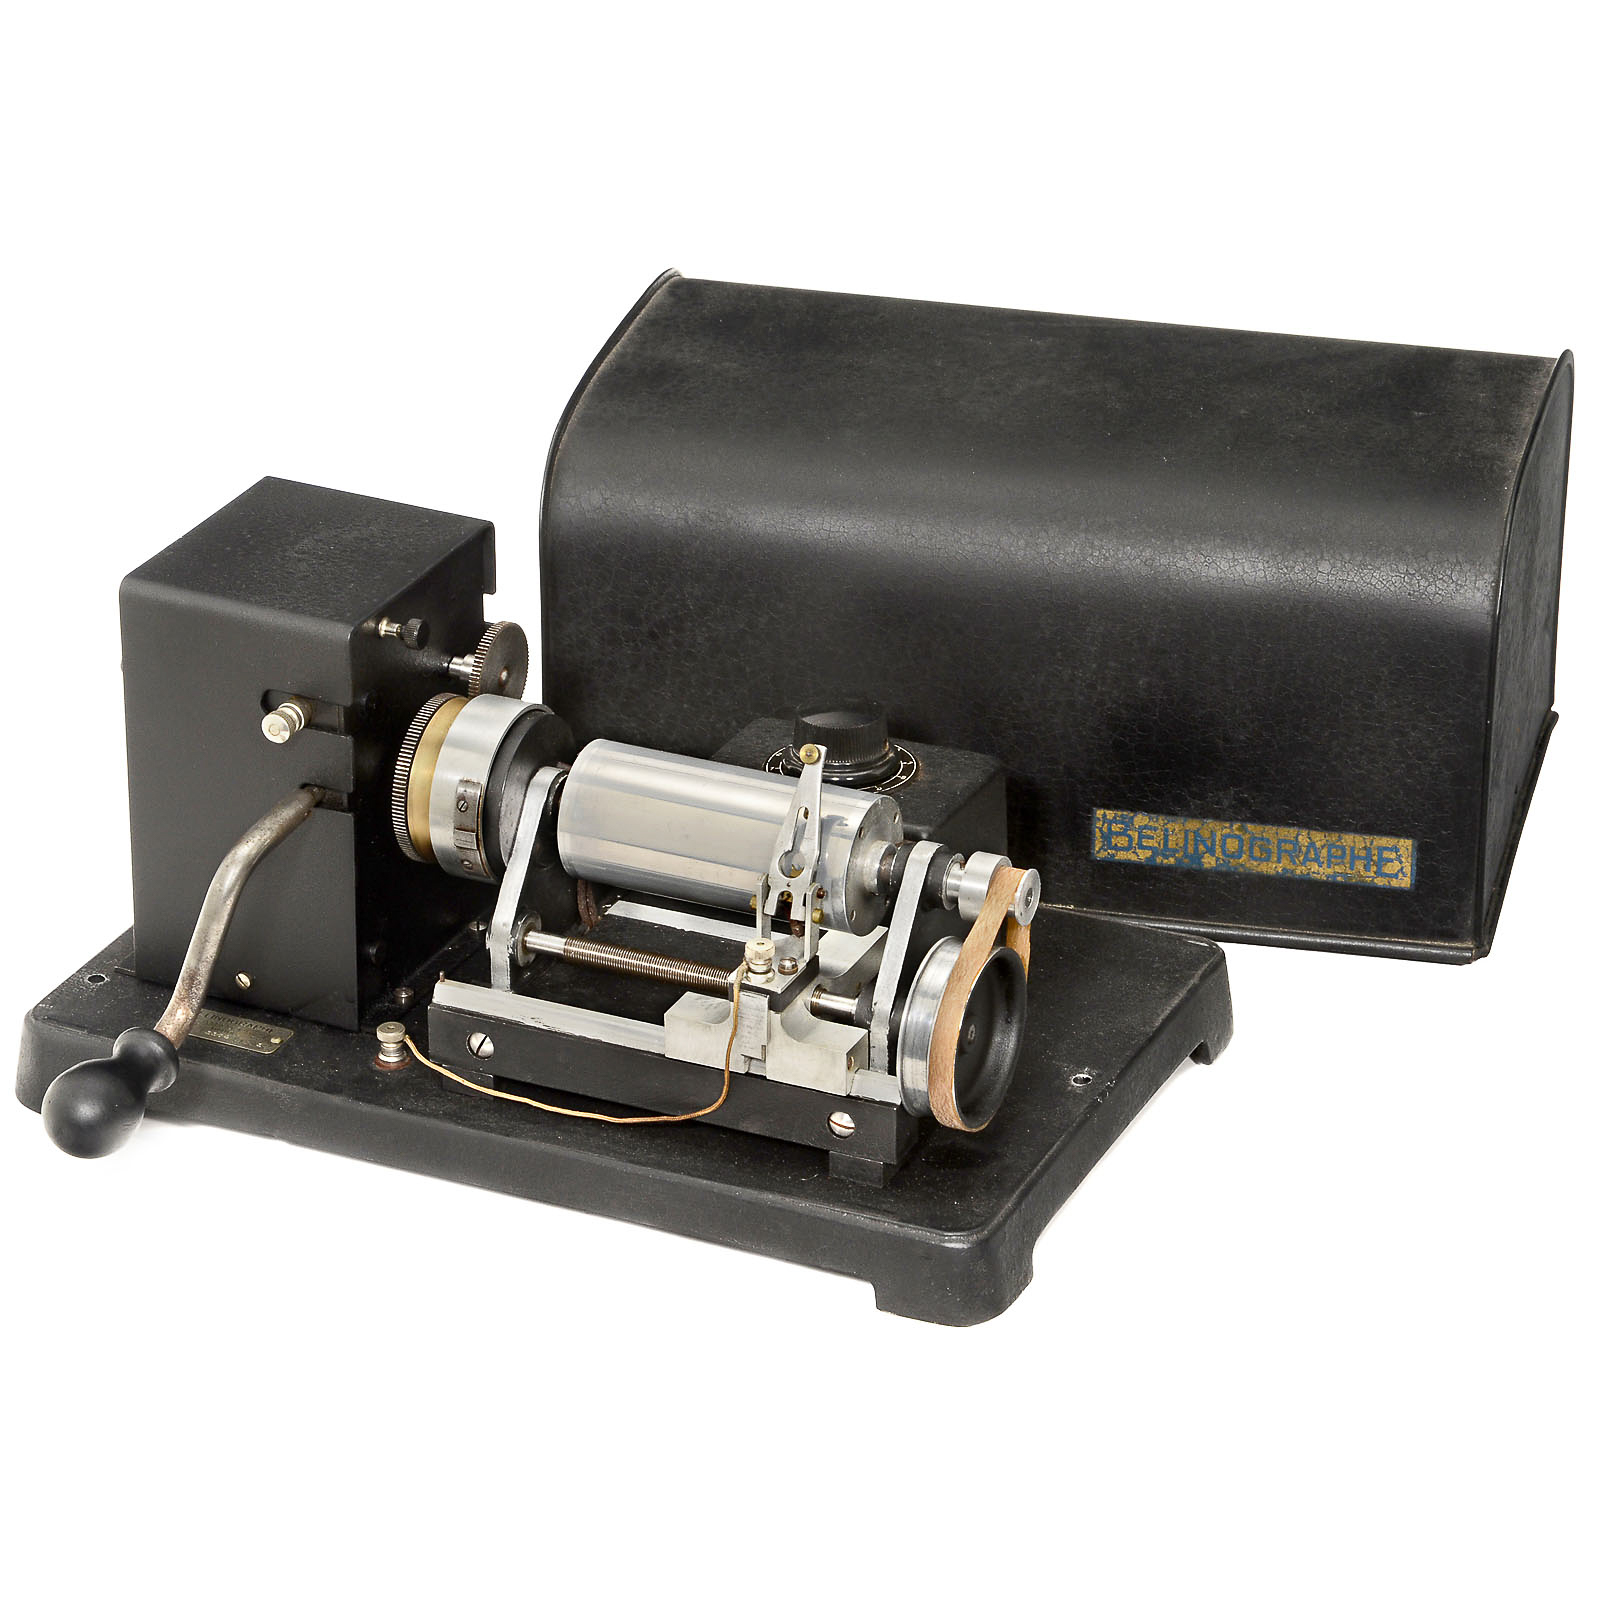 Facsimile "Bélinographe", c. 1928  One of the early practical fax machines, created by French "